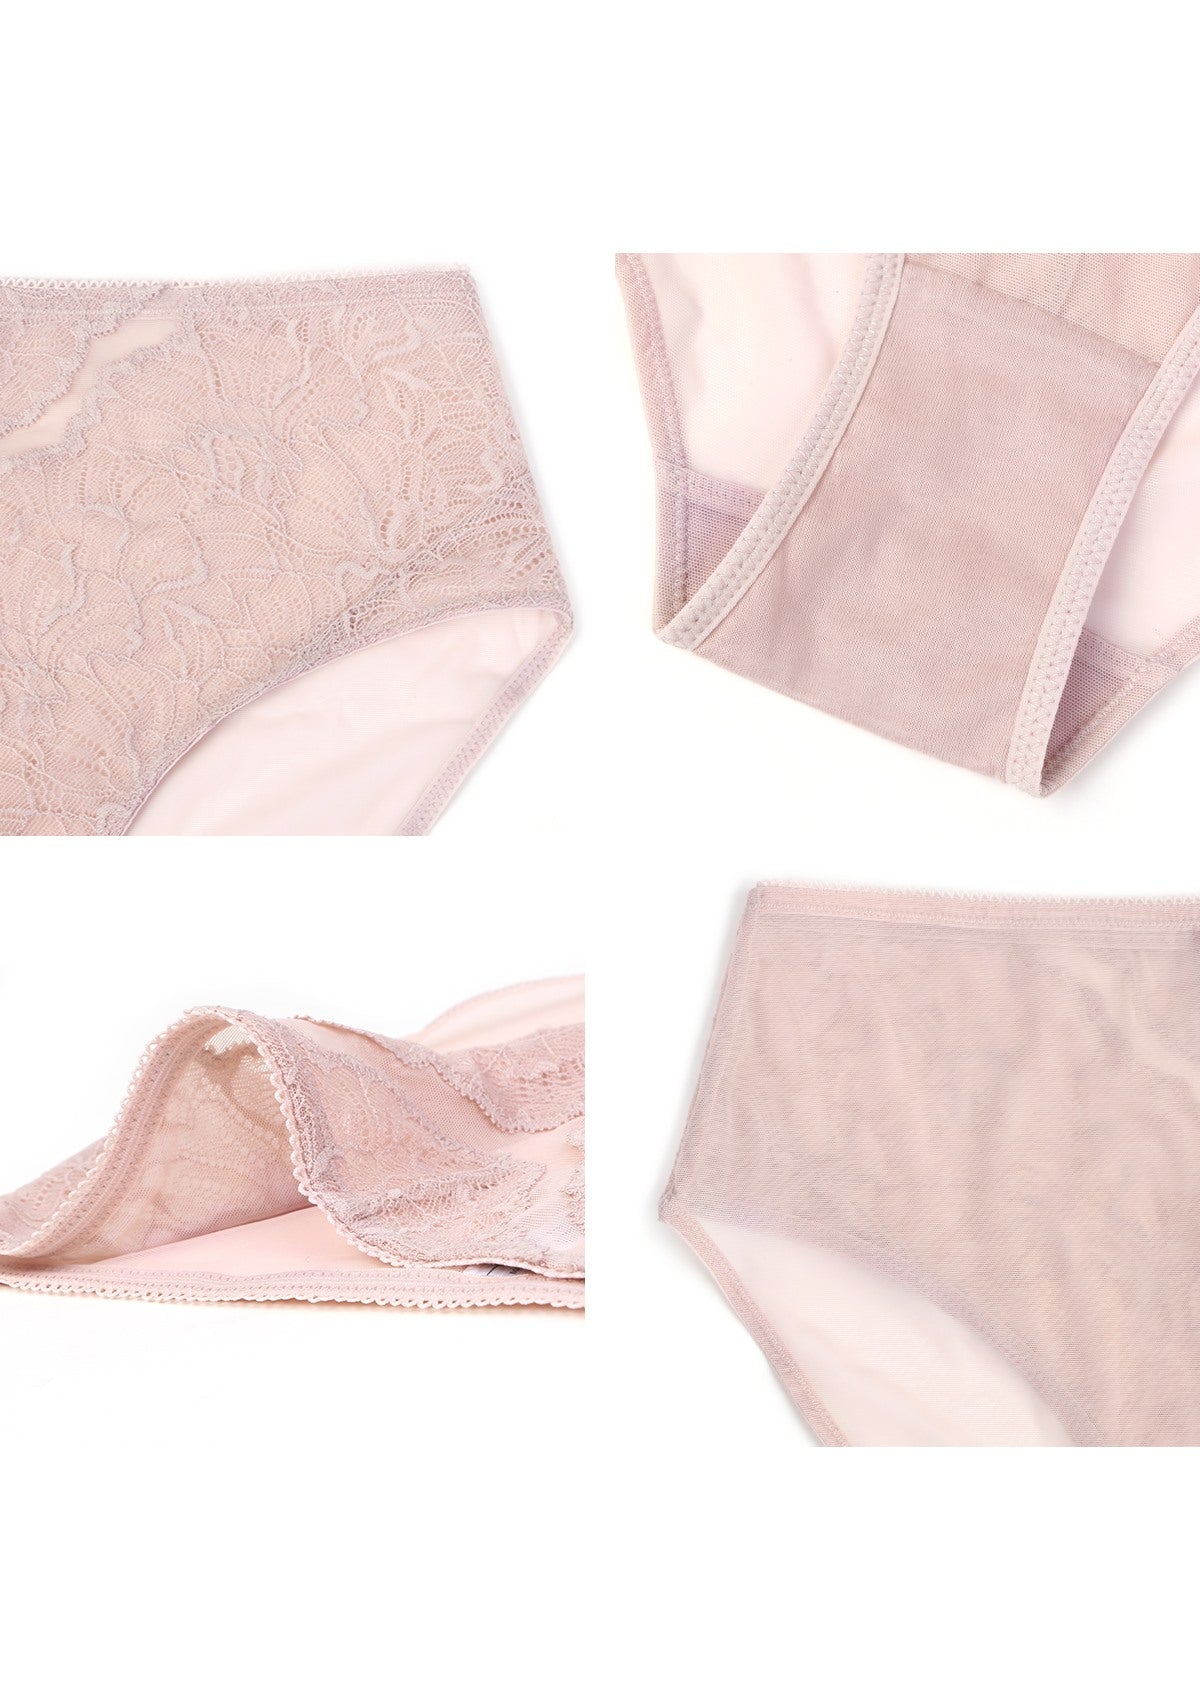 HSIA Blossom High-Rise Floral Lacy Panty-Comfort In Style - XXXL / Dusty Peach